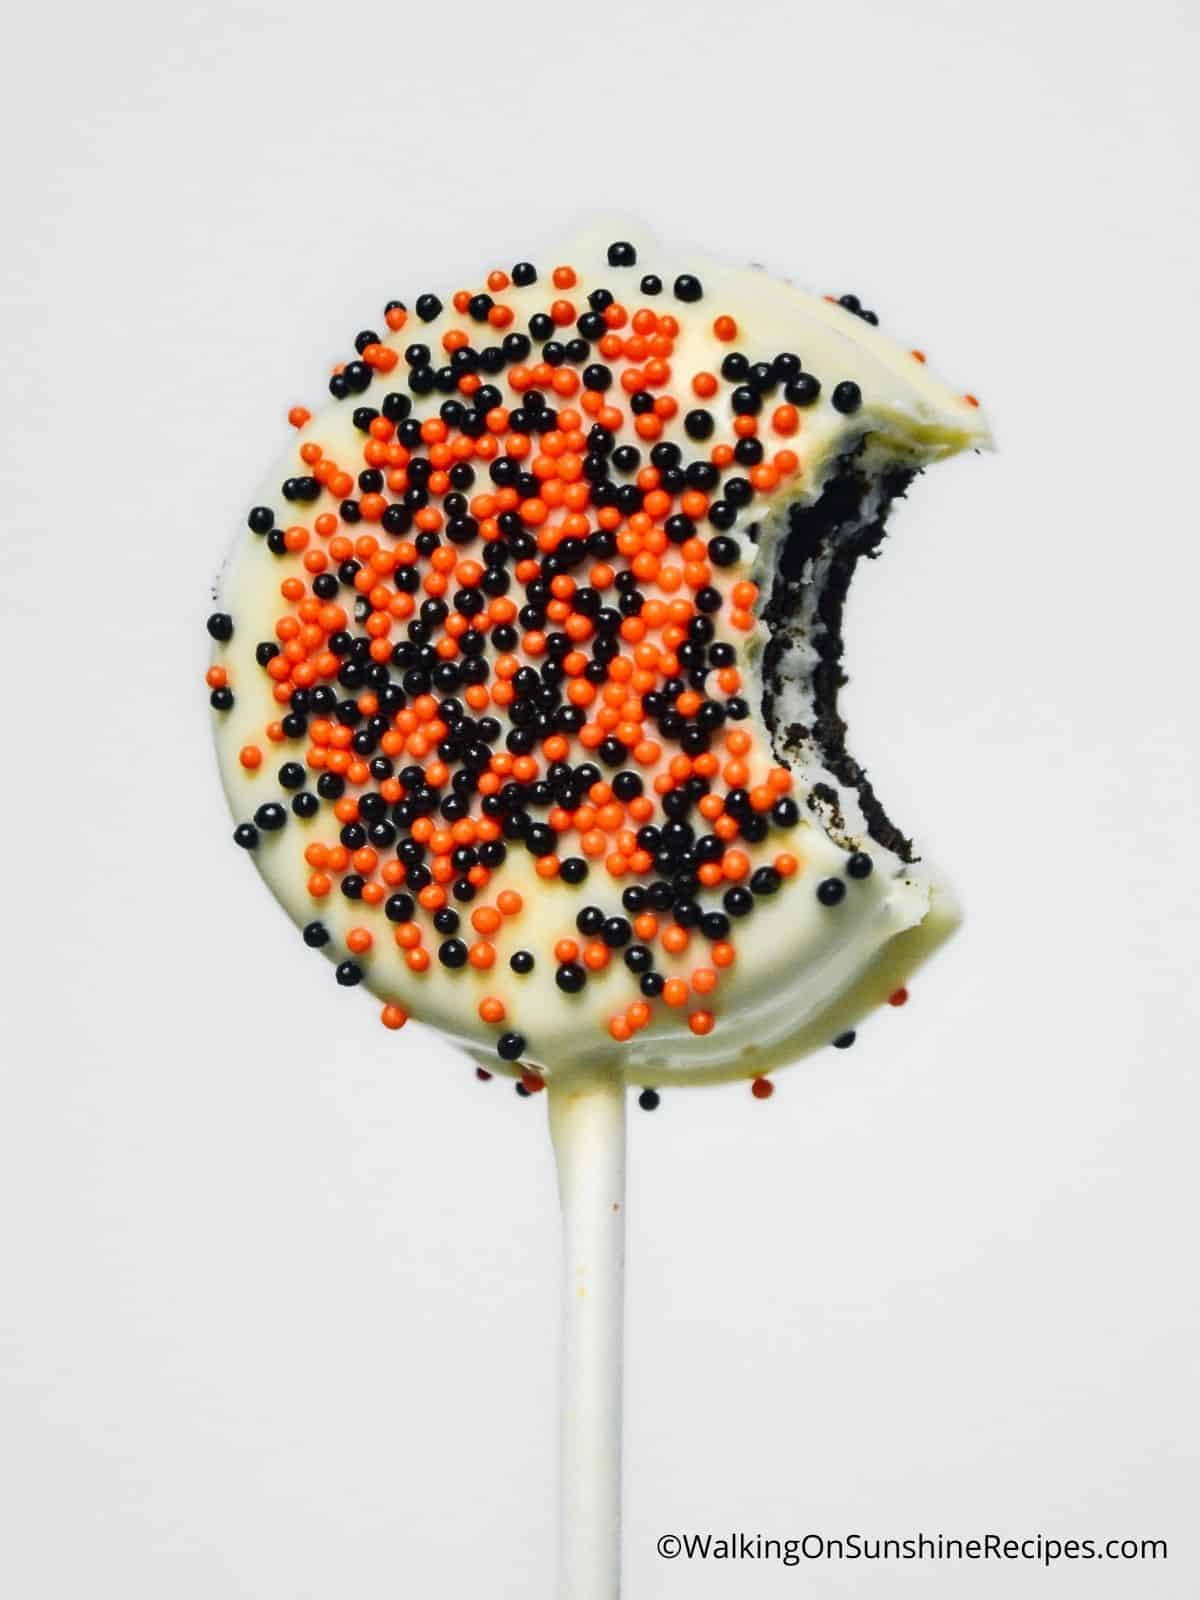 White chocolate covered Oreo on a stick.